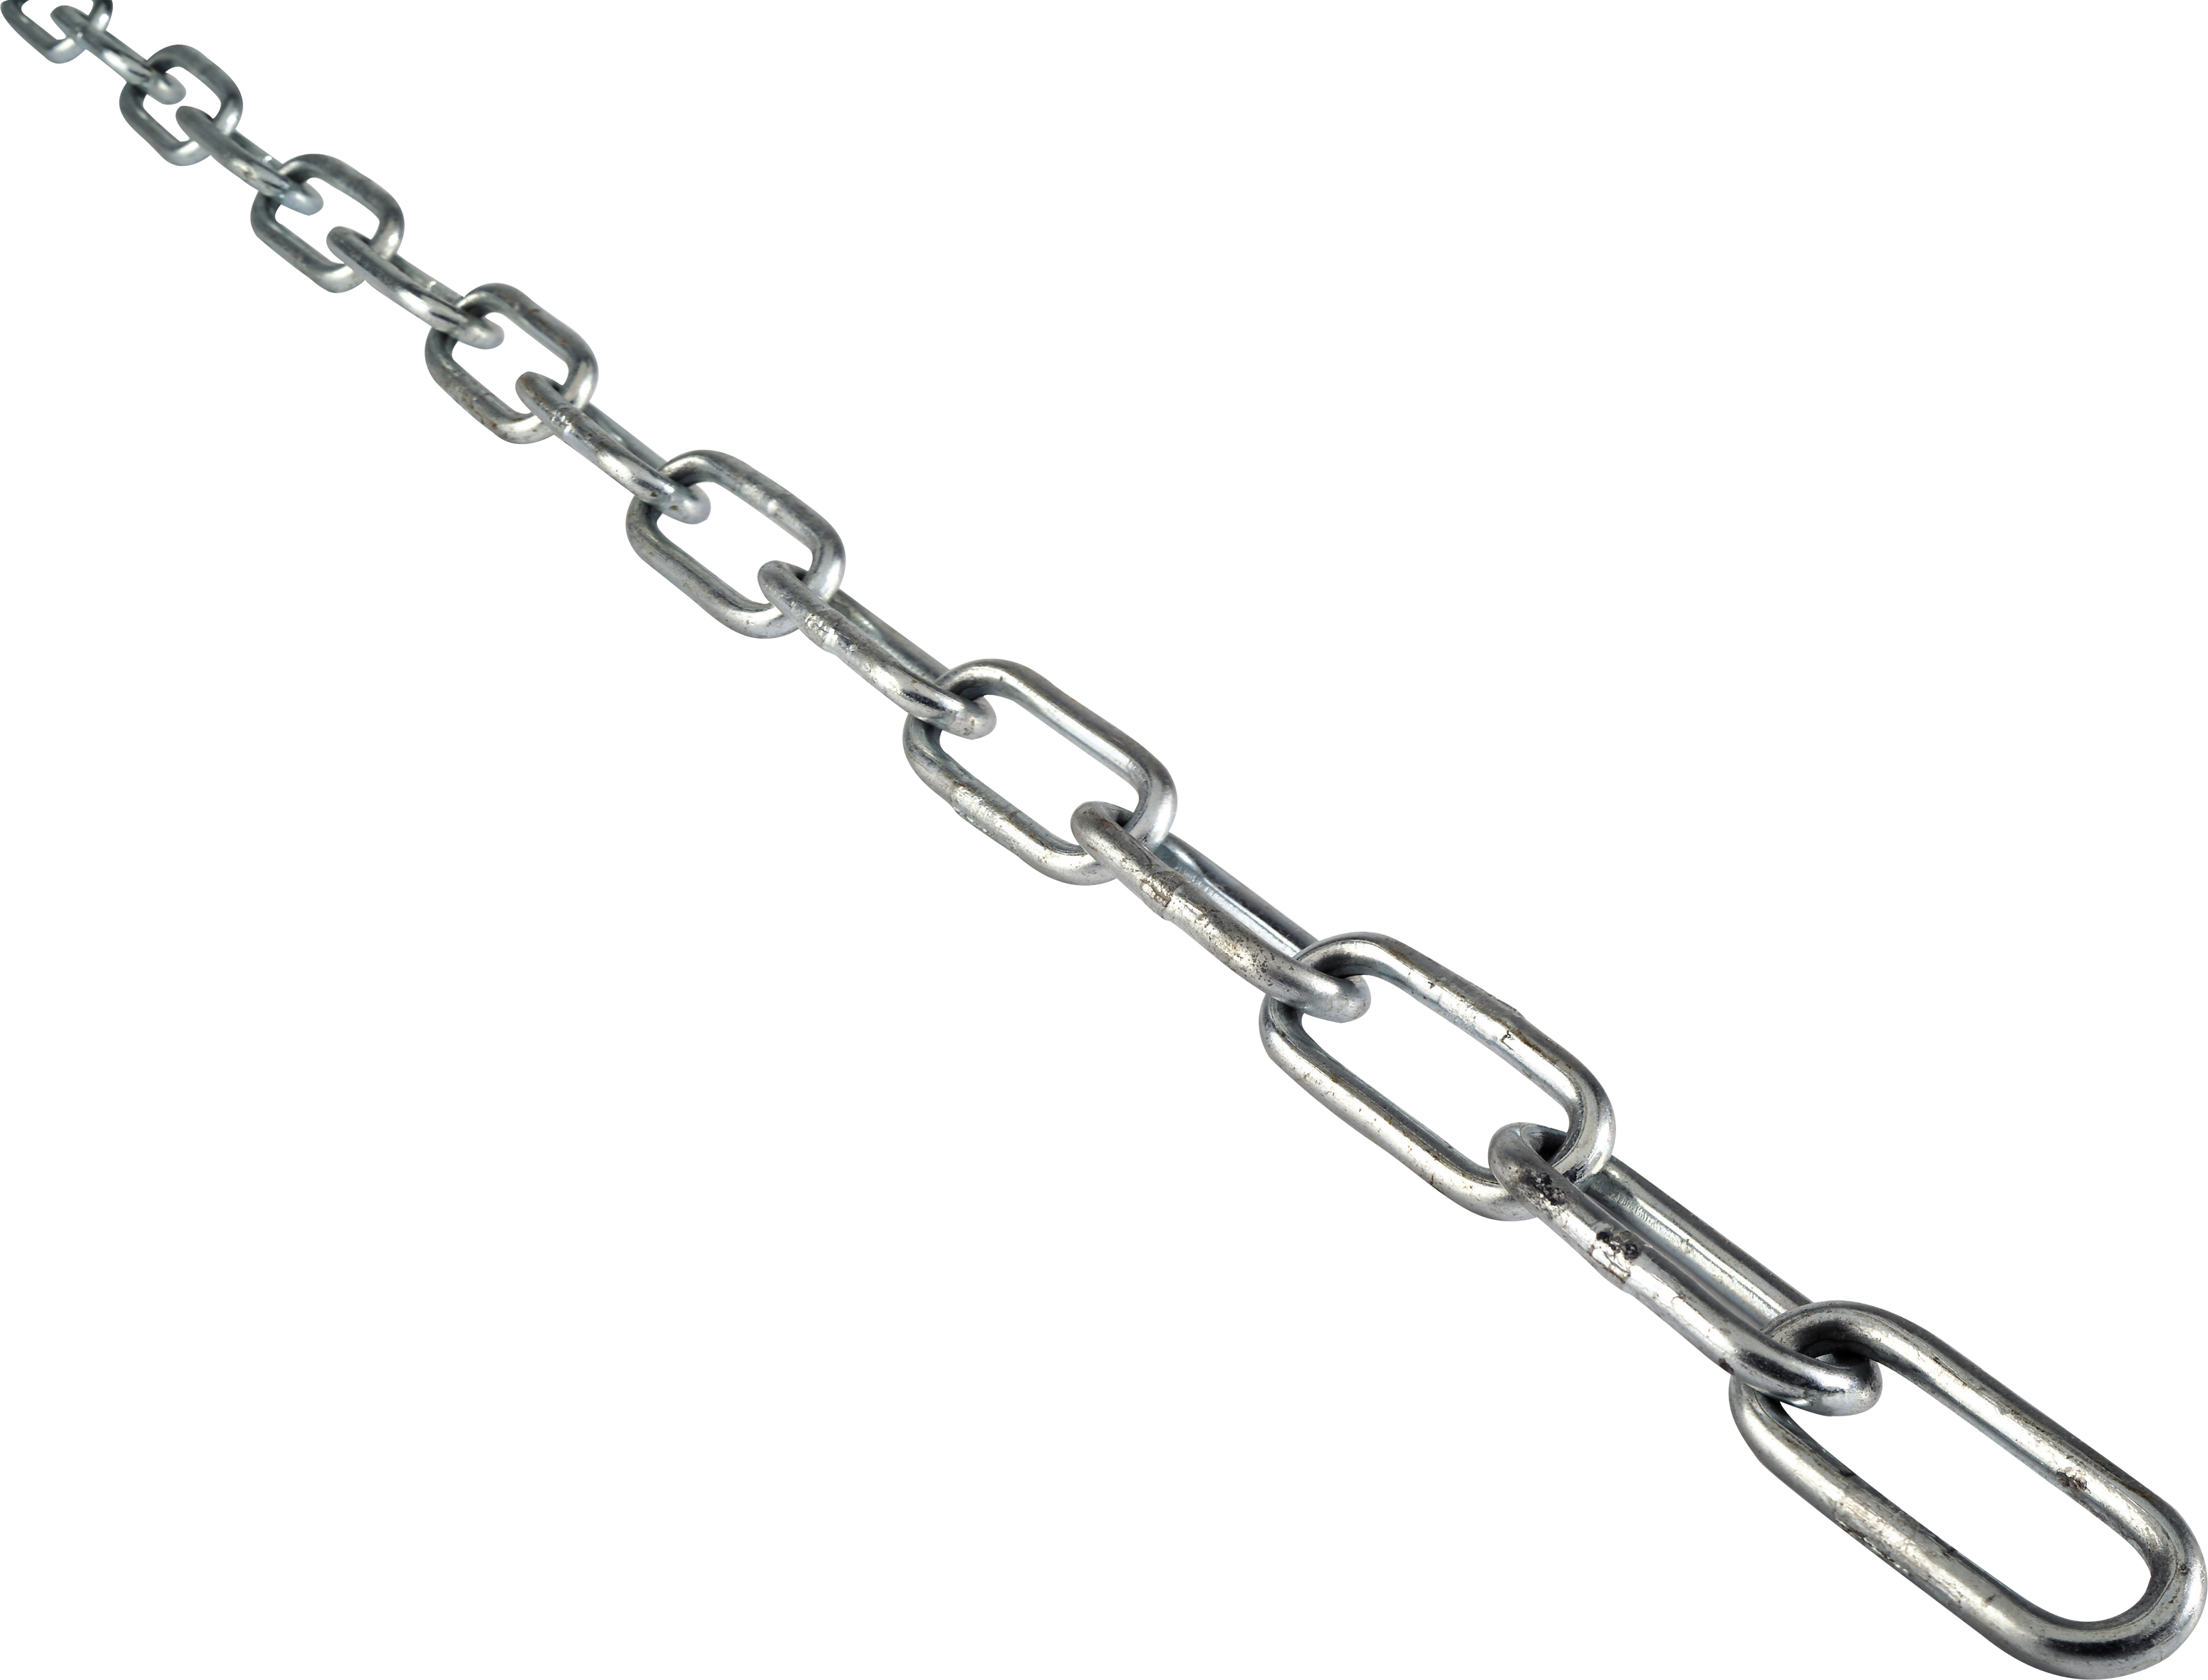 Metal chain PNG image transparent image download, size: 3461x2633px